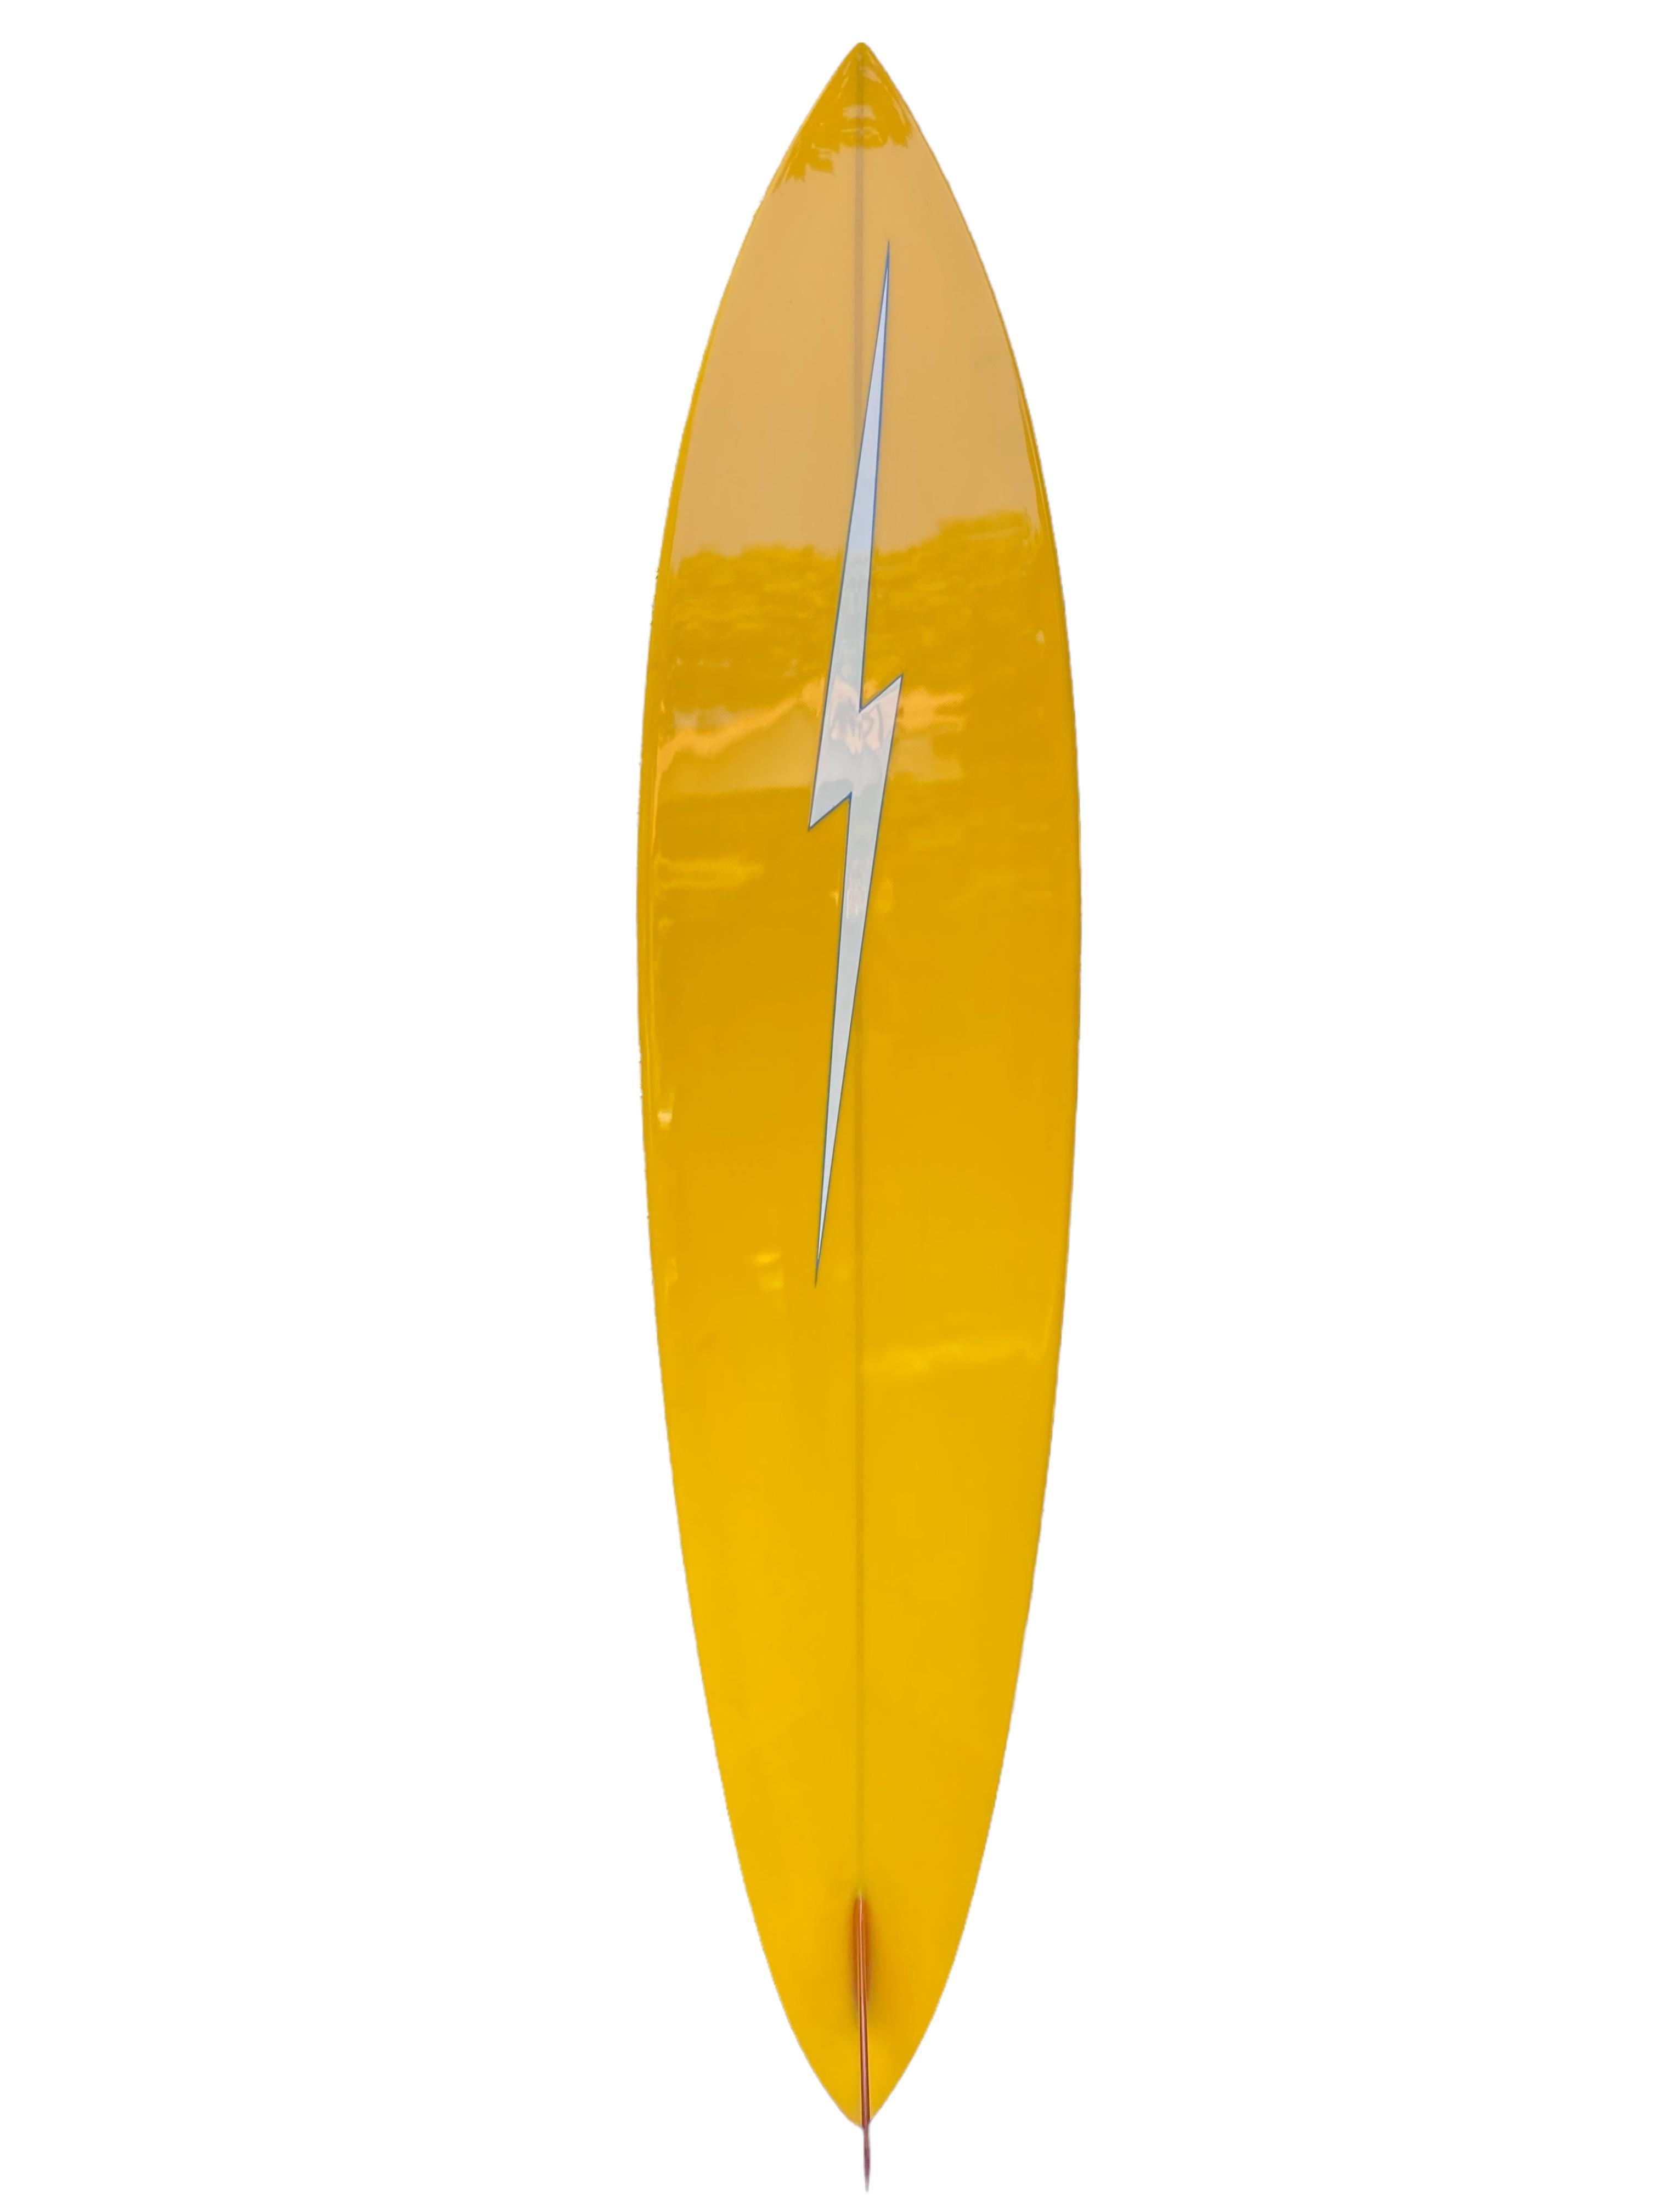 1976 Lightning Bolt surfboard shaped by Pat Rawson. Features a beautiful orange/yellow color scheme joined by a double pinstriped outline. Pintail shape design with glassed-on single fin. A remarkable example of a highly sought after vintage 1970s